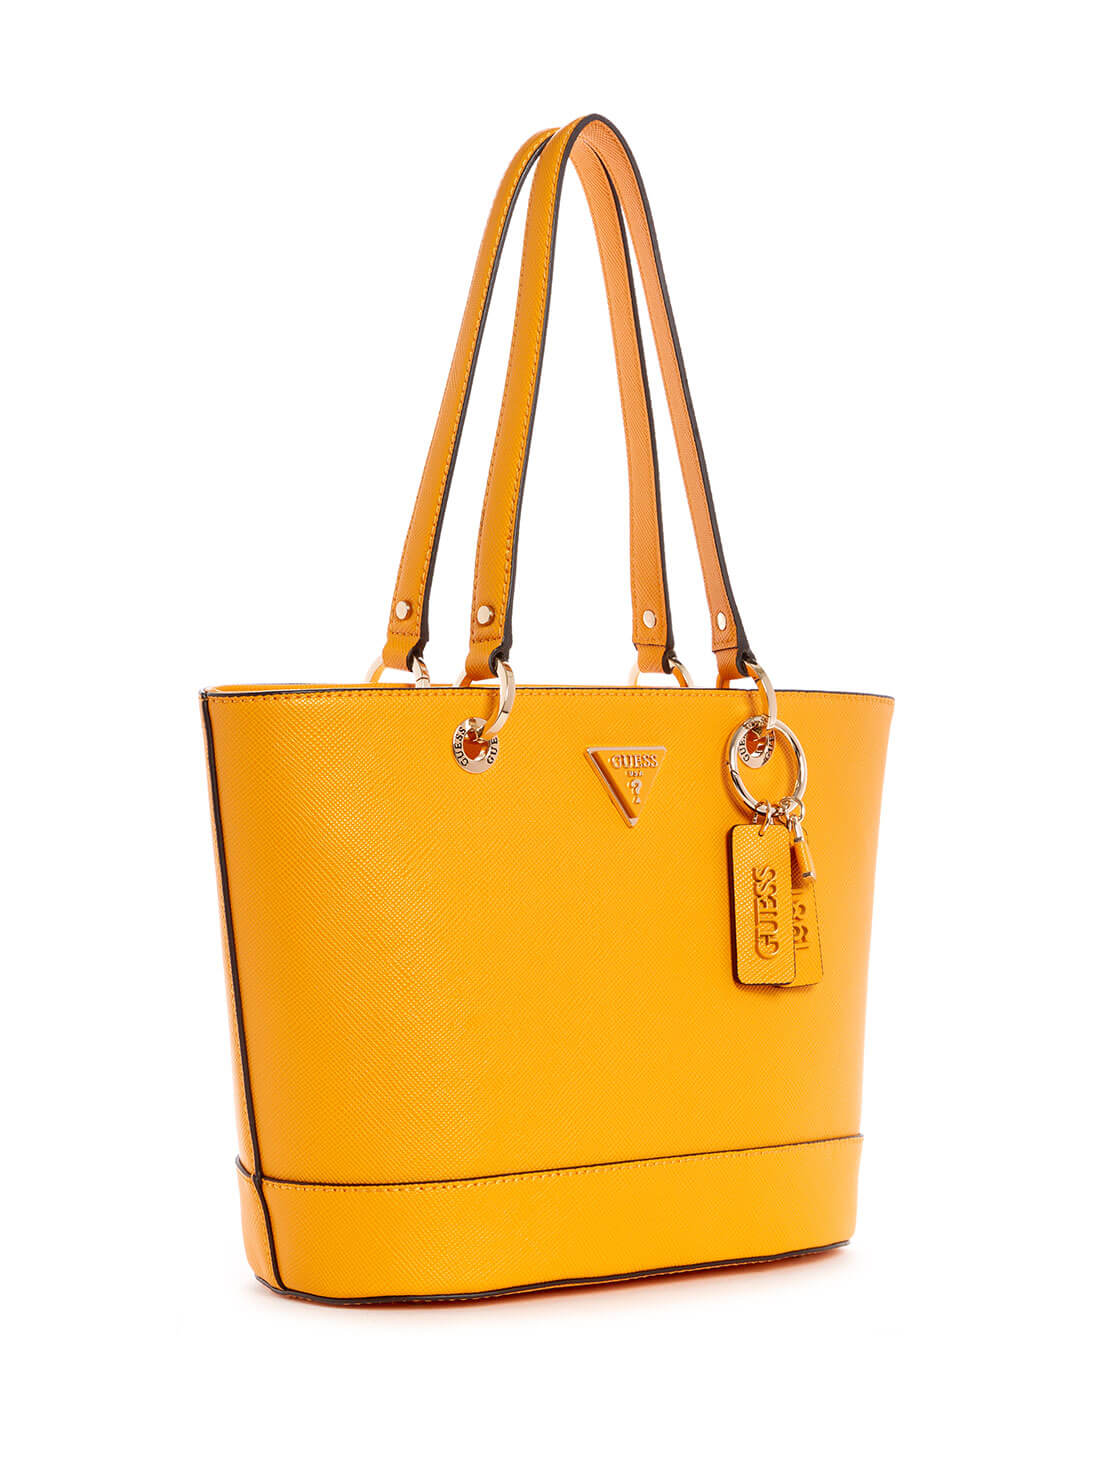 GUESS Womens Mango Orange Noelle Small Elite Tote Bag ZG787922 Front Side View